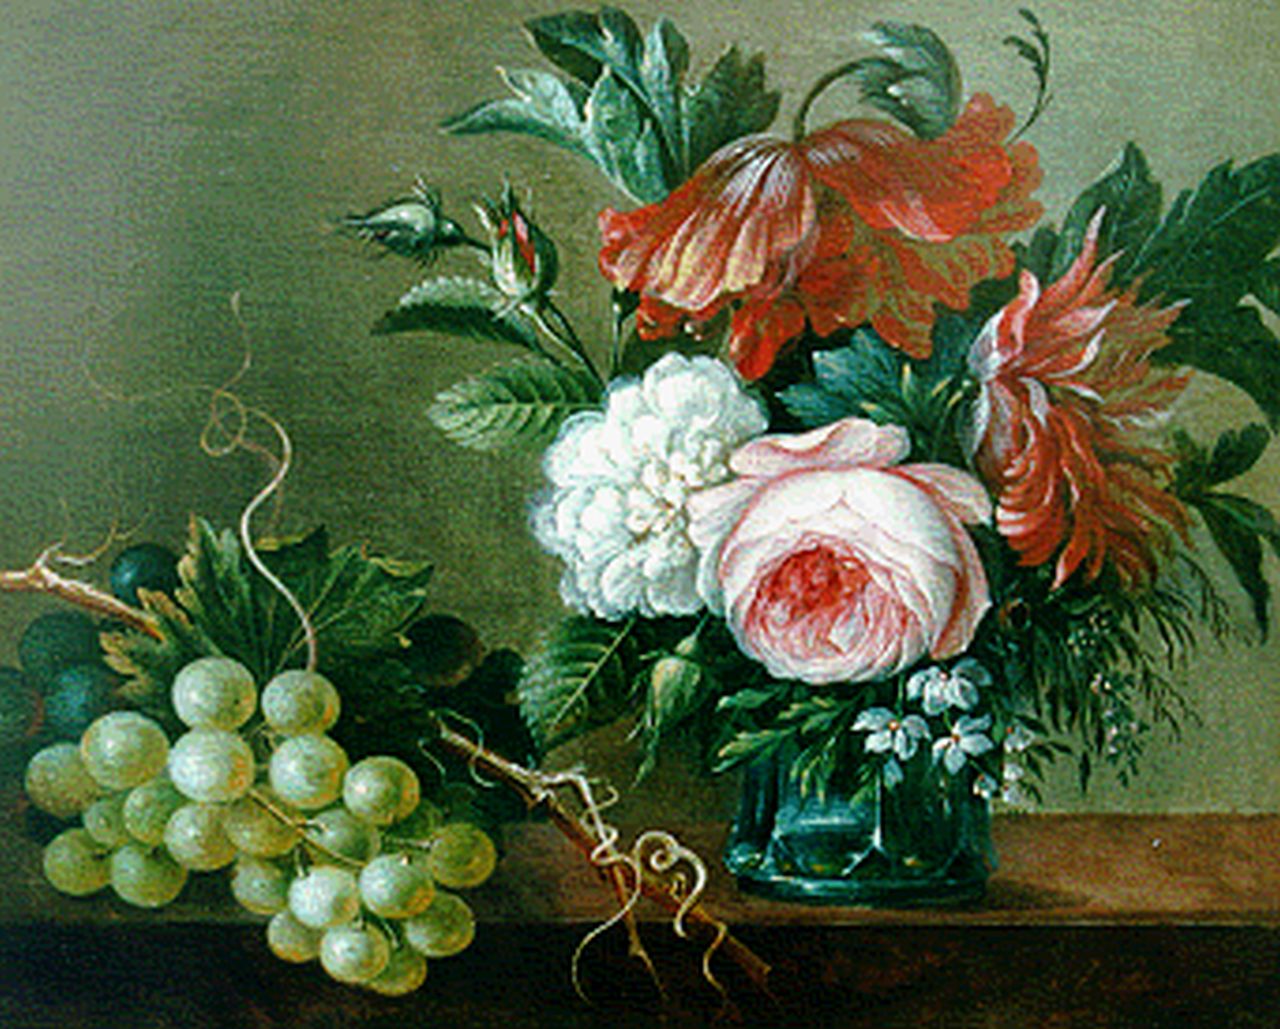 Apol A.  | Adrianus Apol, Still life with flowers and grapes, Öl auf Holz 22,9 x 28,3 cm, signed l.r. und datiert 1845